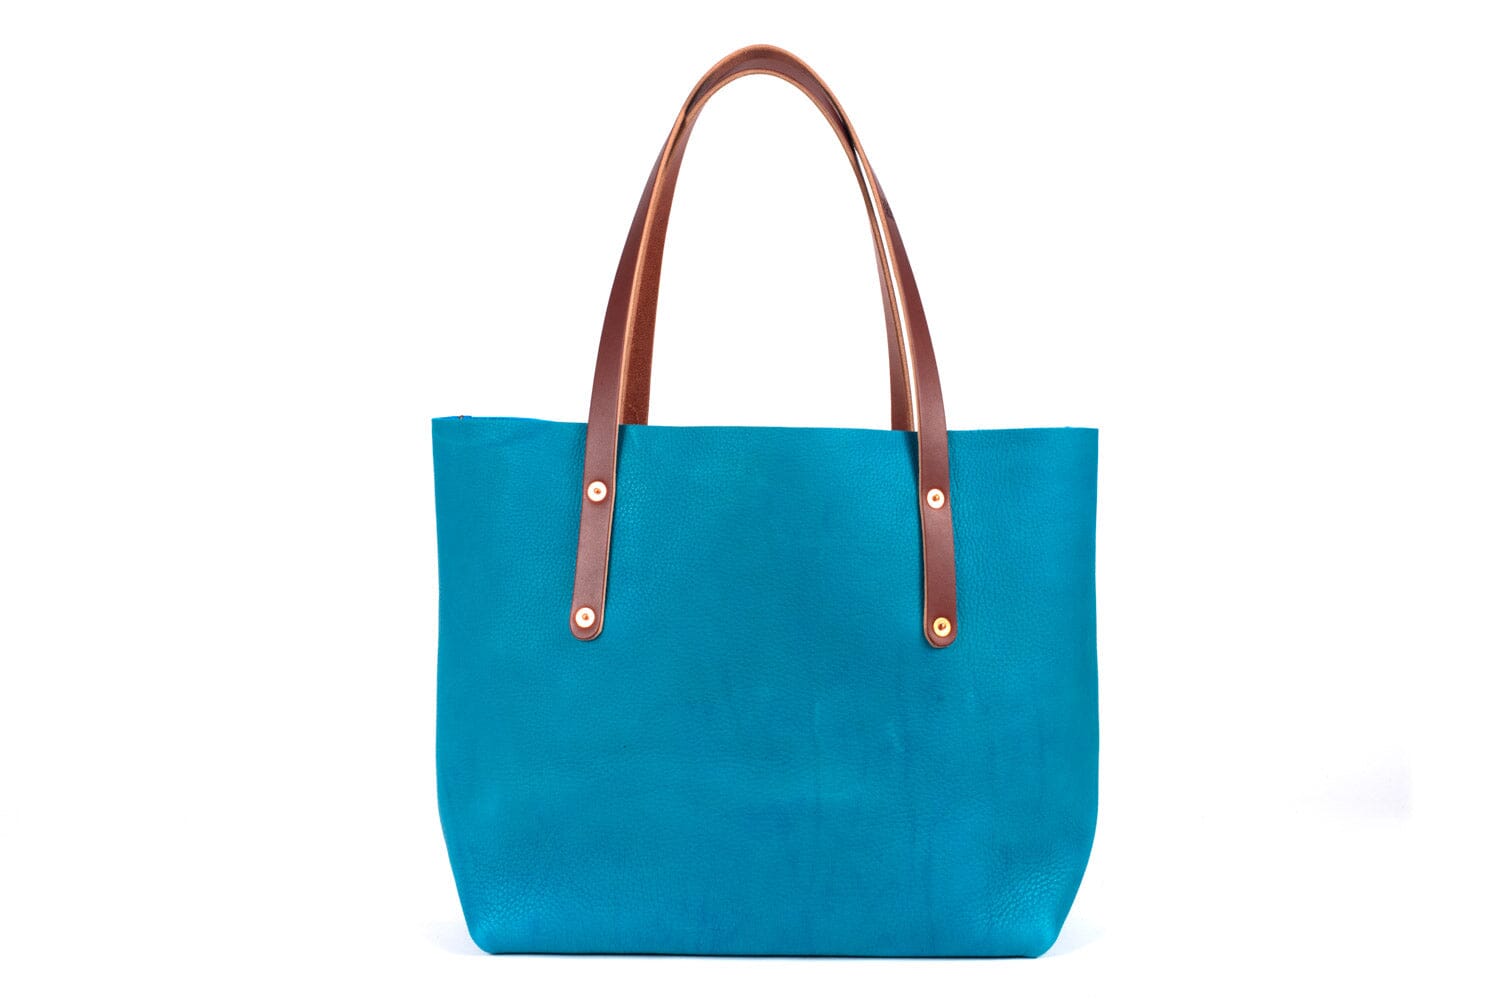 AVERY LEATHER TOTE BAG - LARGE - TURQUOISE